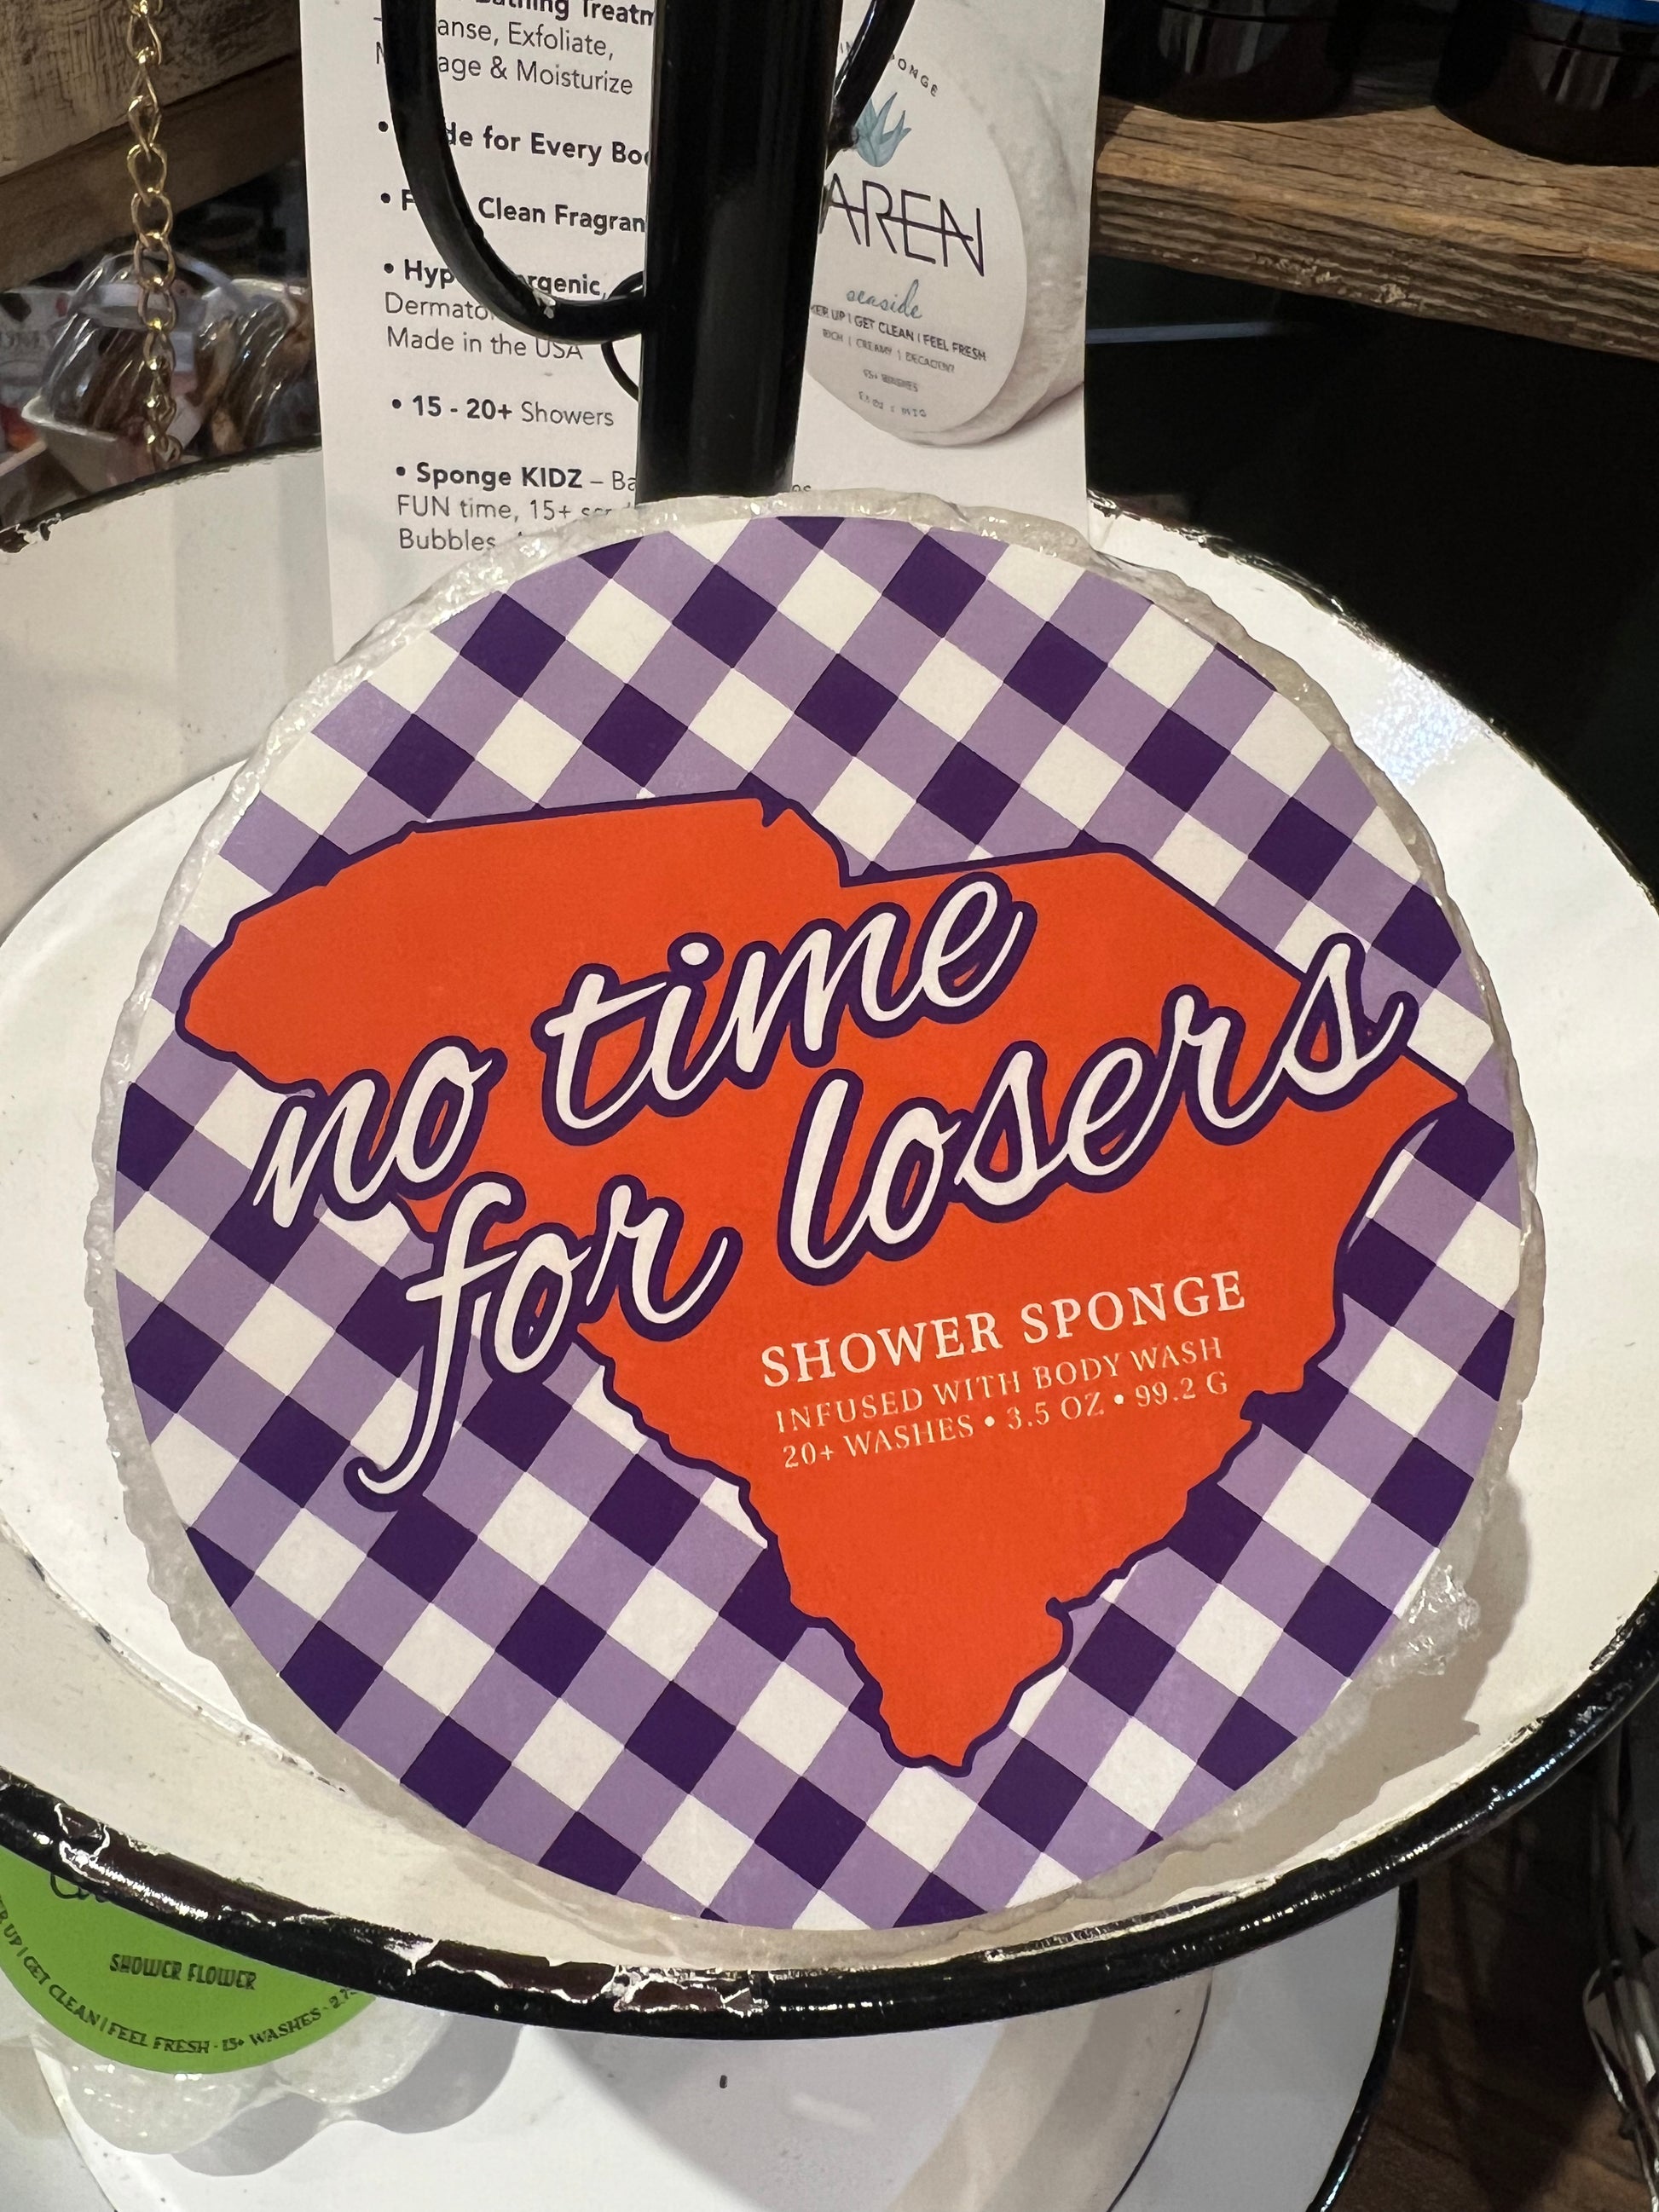 Caren "No time for losers" Clemson soap sponge. White and round.